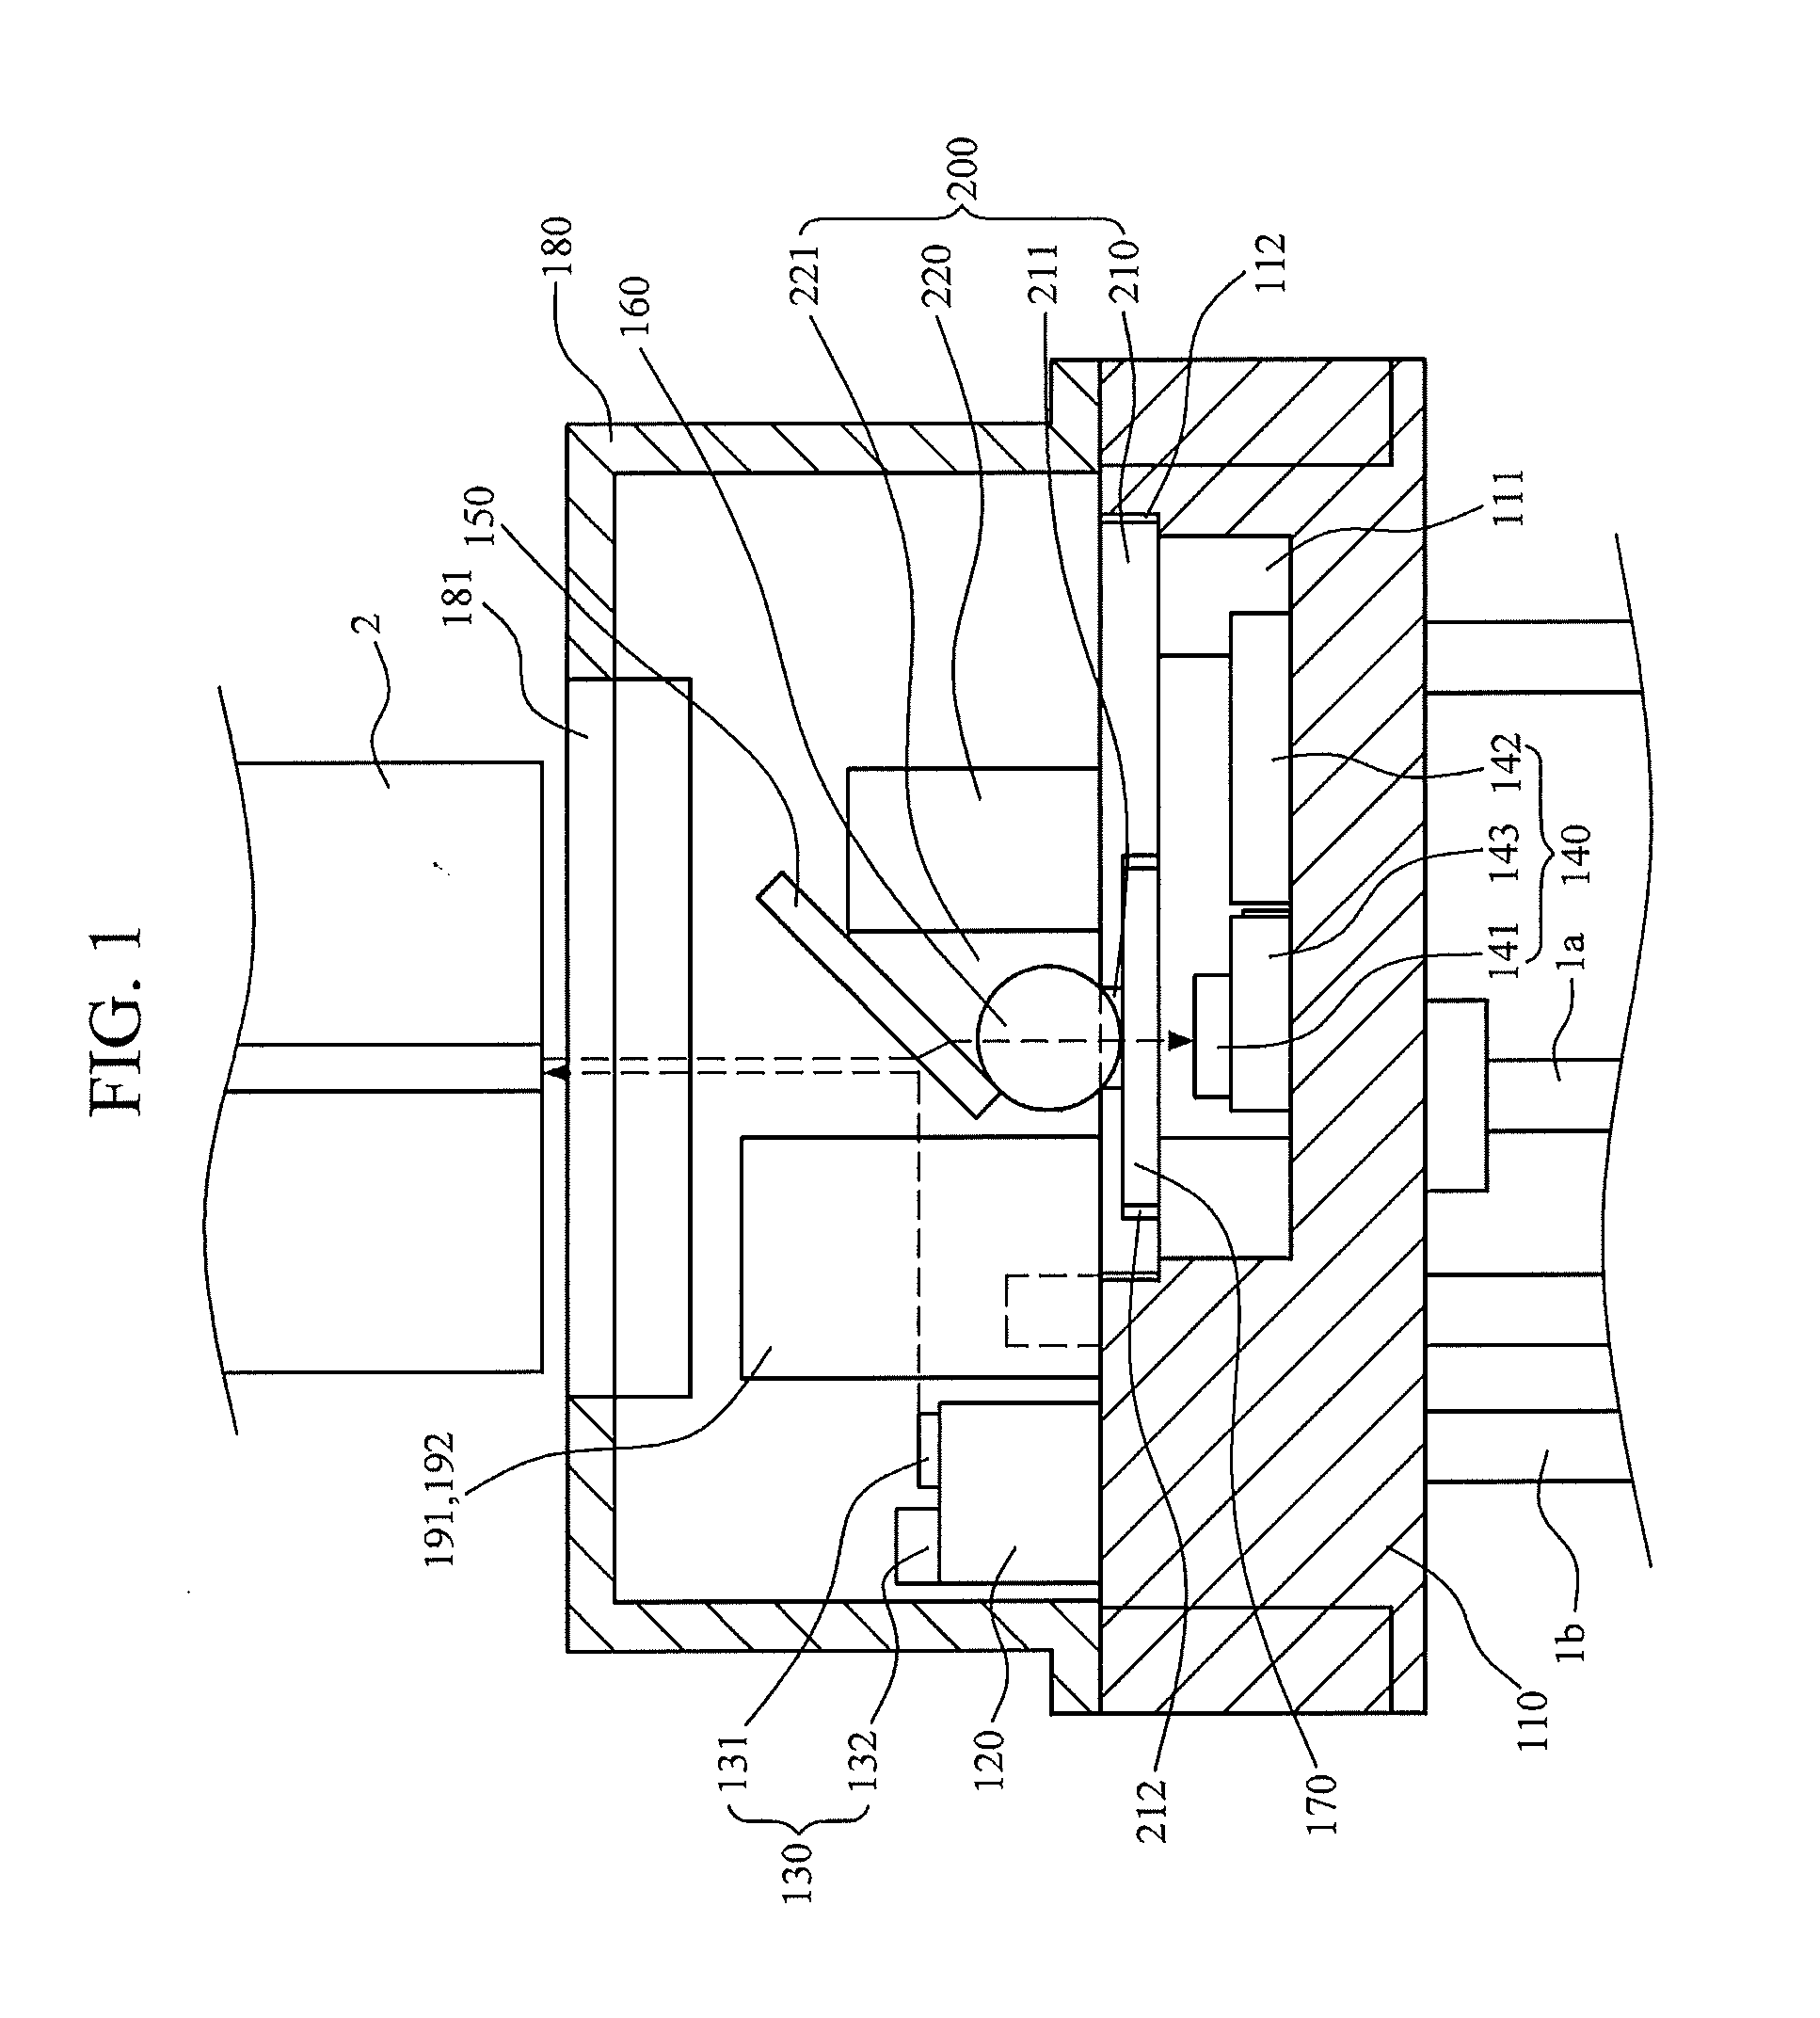 Bidirectional optical transceiver module and method of aligning the same